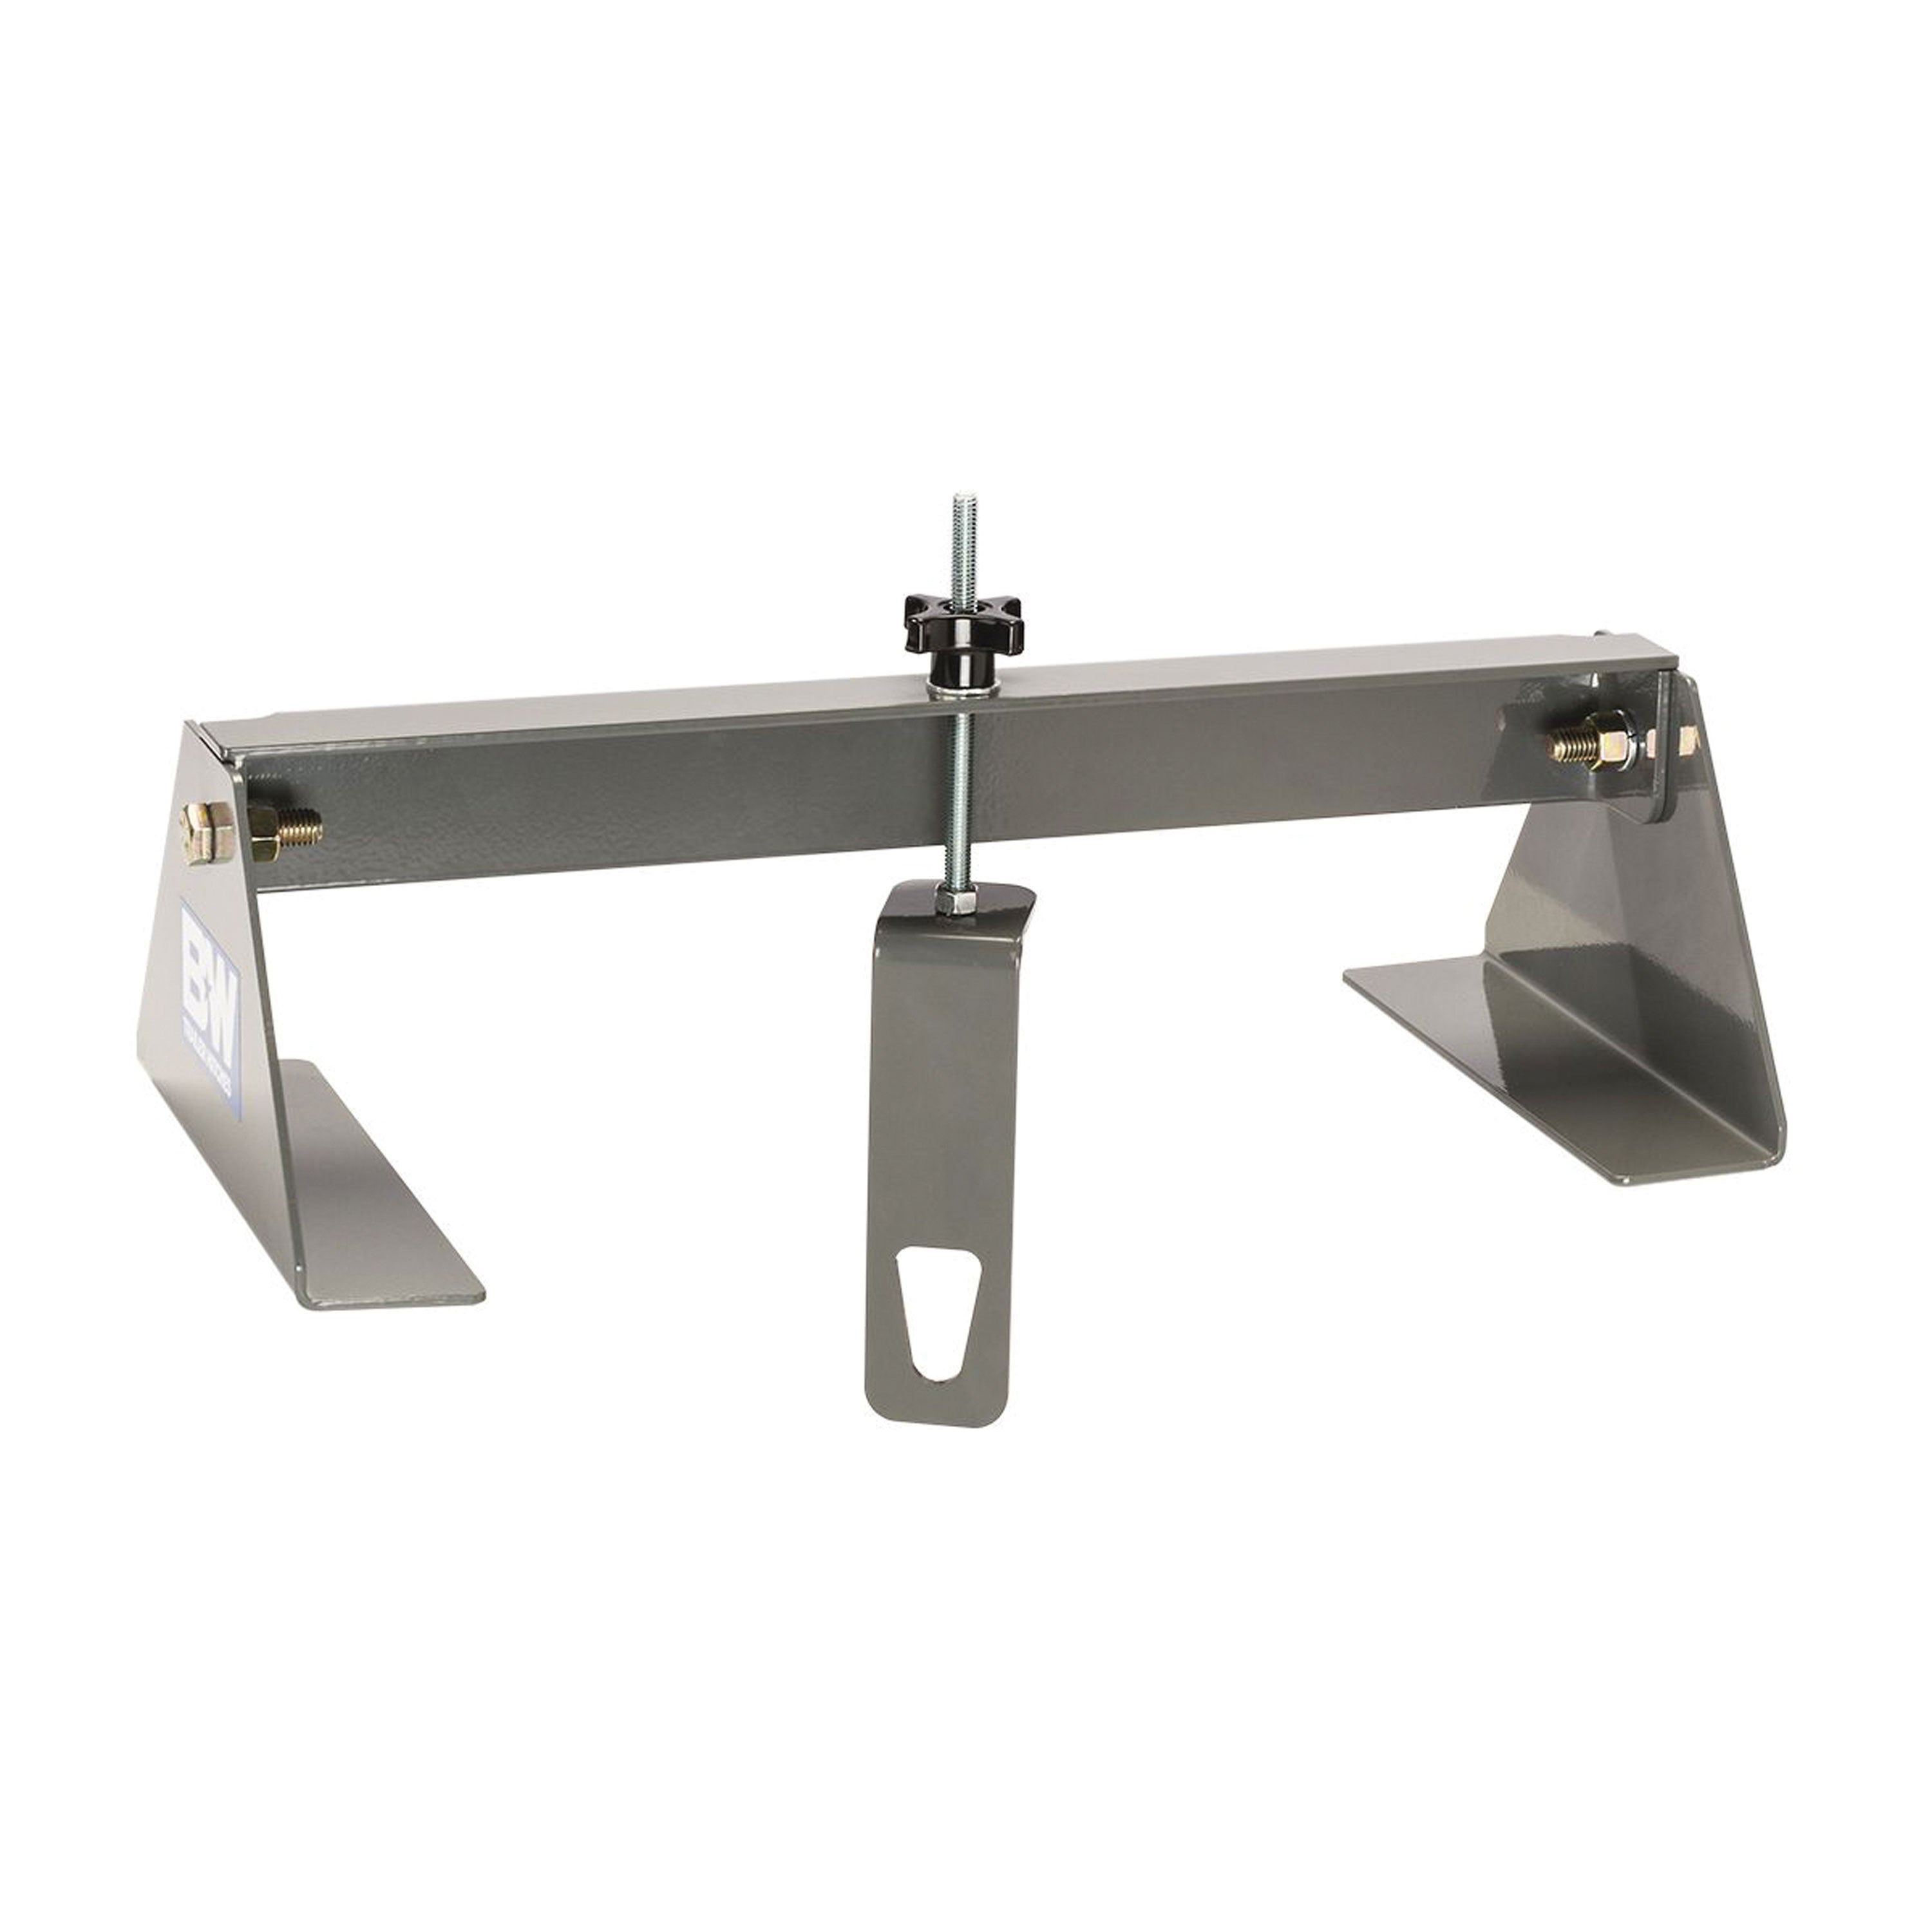 B&W Trailer Hitches Hitch Helper for Turnoverball Hitch Installation